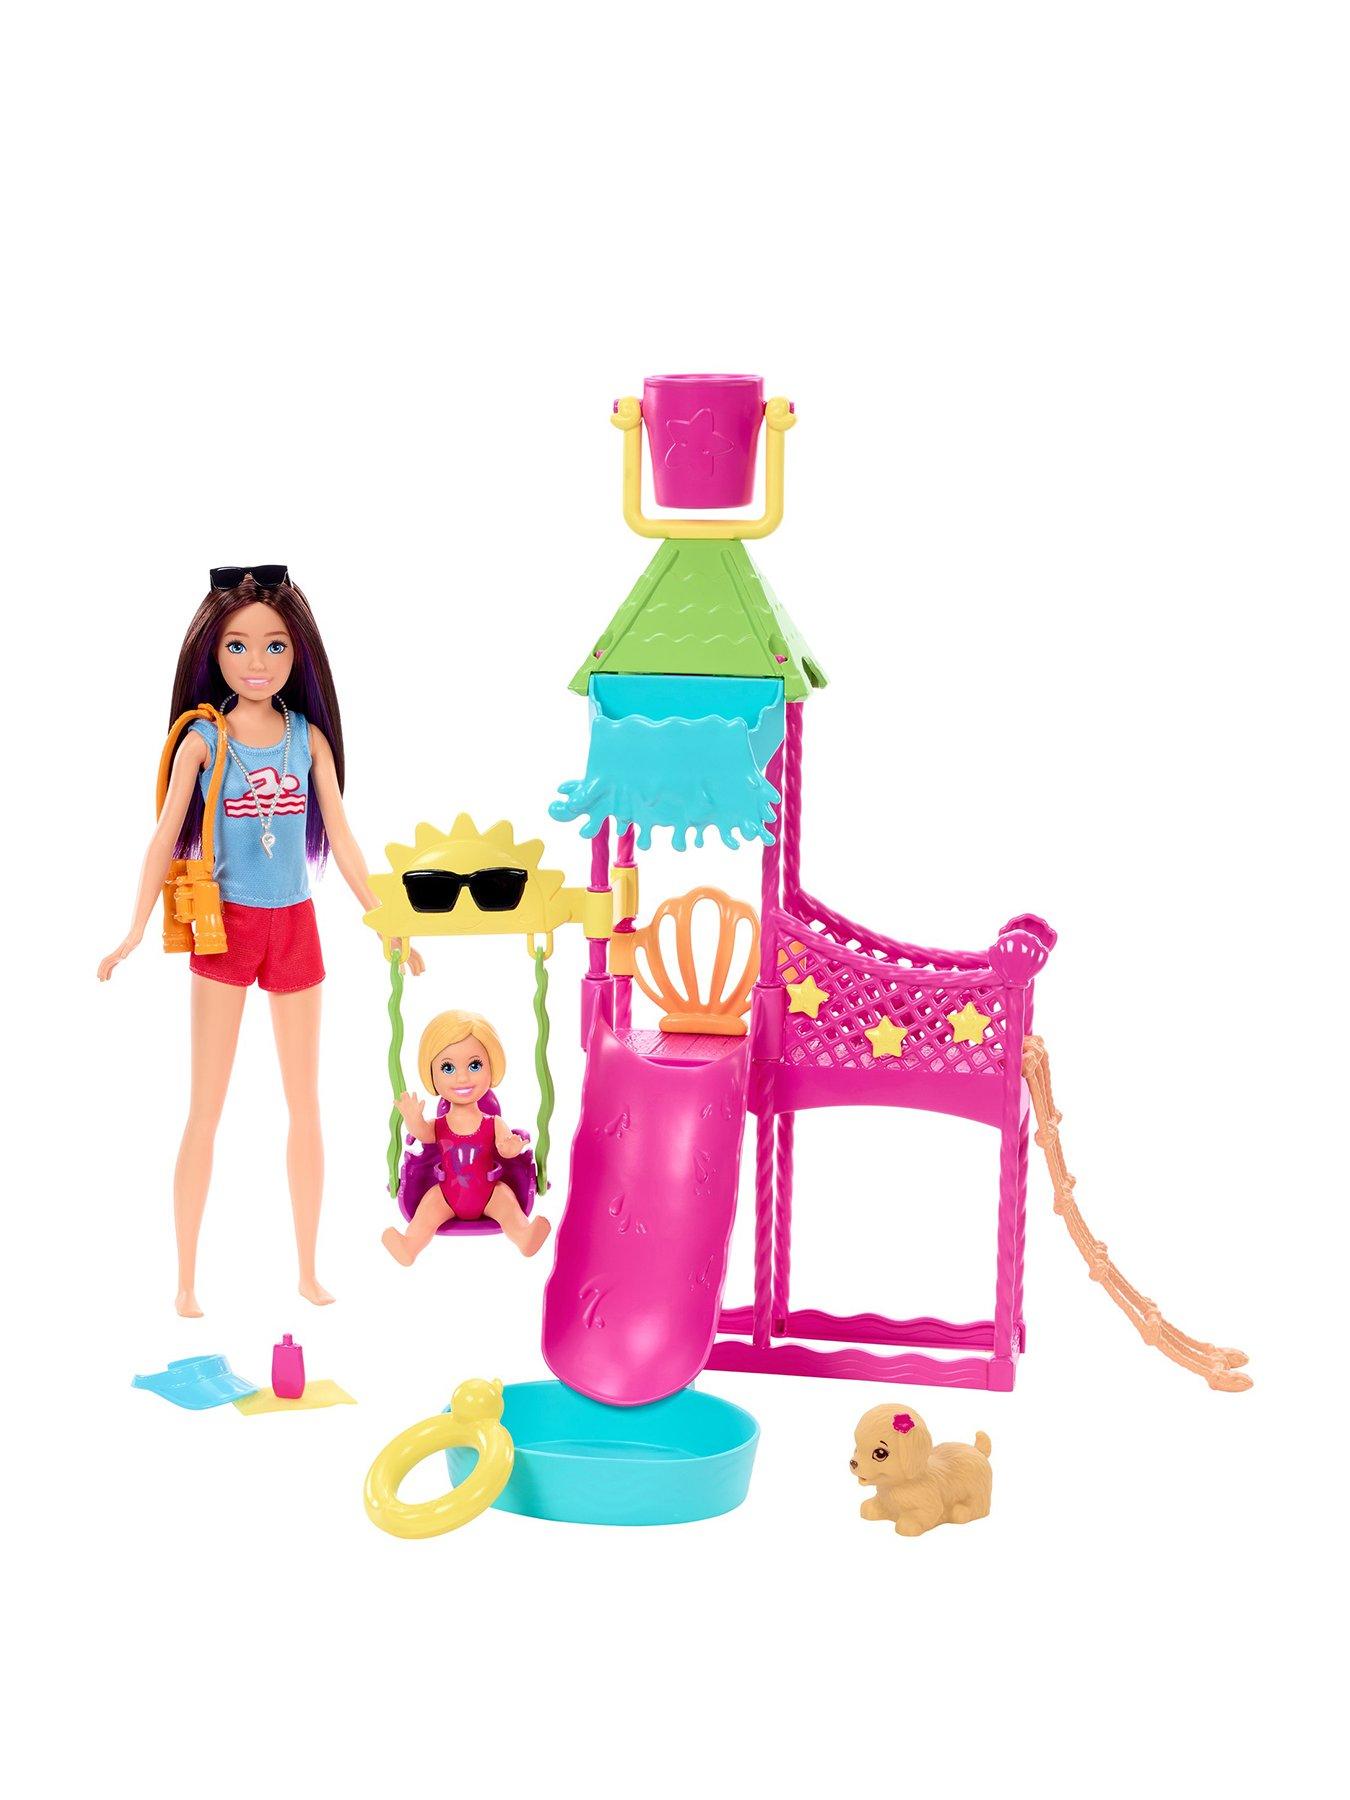 Barbie, Doll playsets, Toys